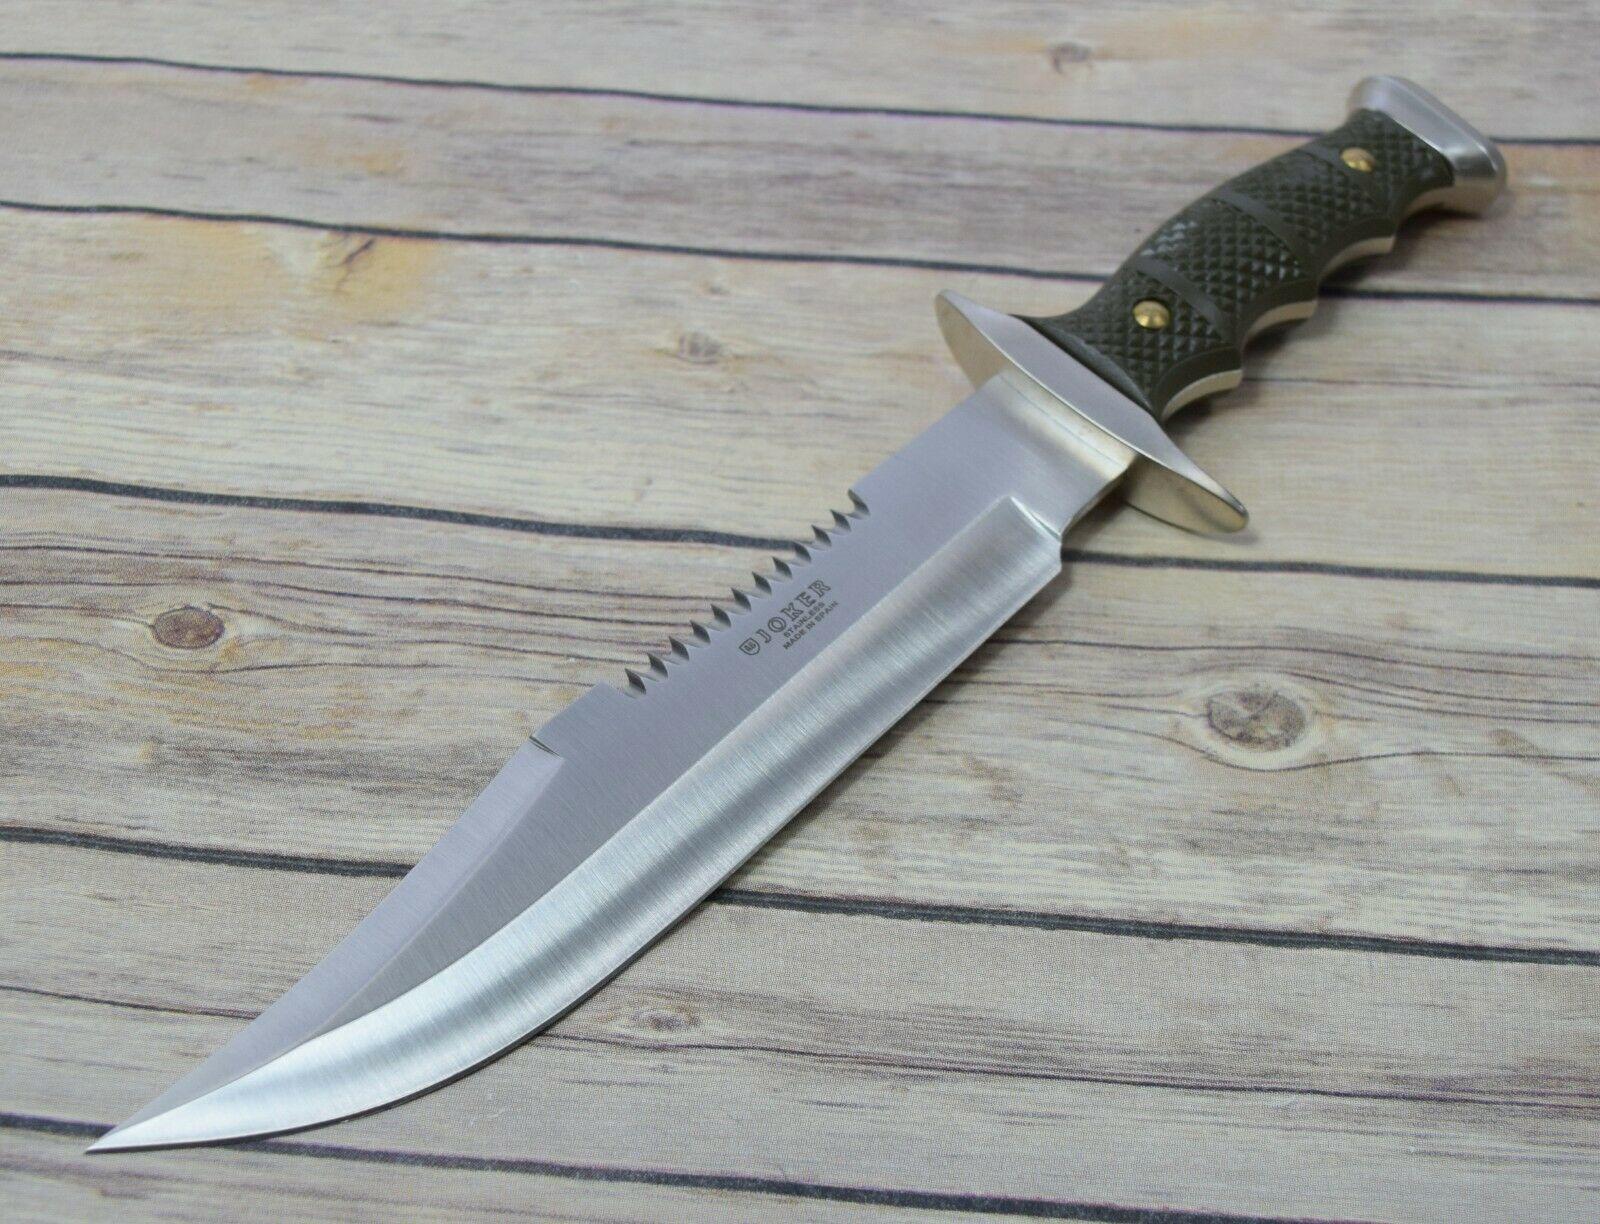 JOKER KNIVES MADE IN SPAIN FIXED BLADE BIG BOWIE HUNTING KNIFE